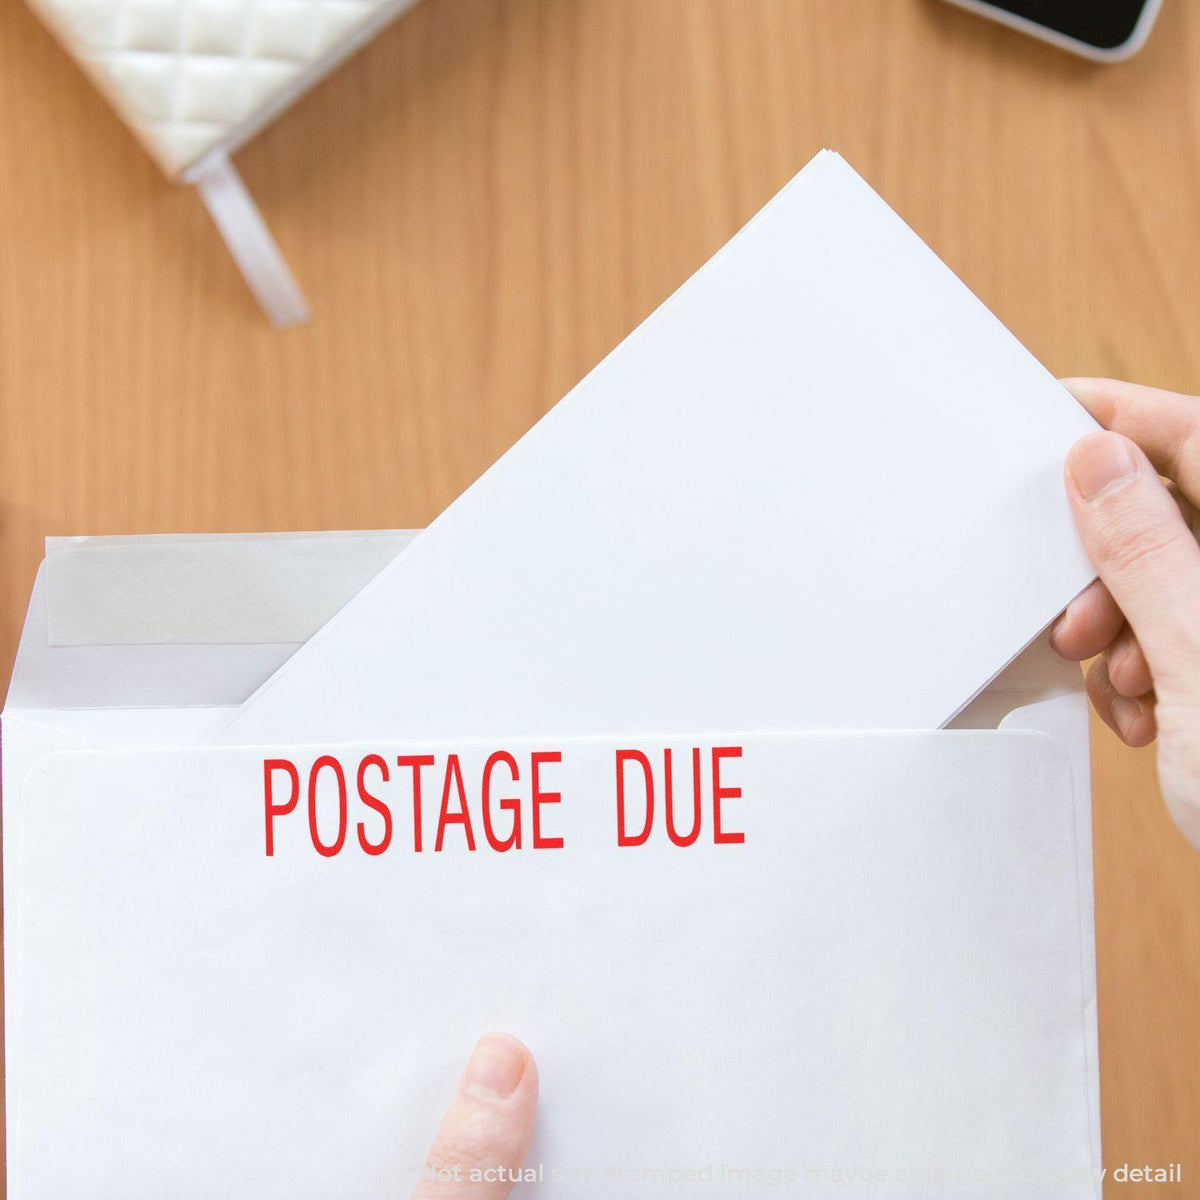 Large Postage Due Rubber Stamp In Use Photo